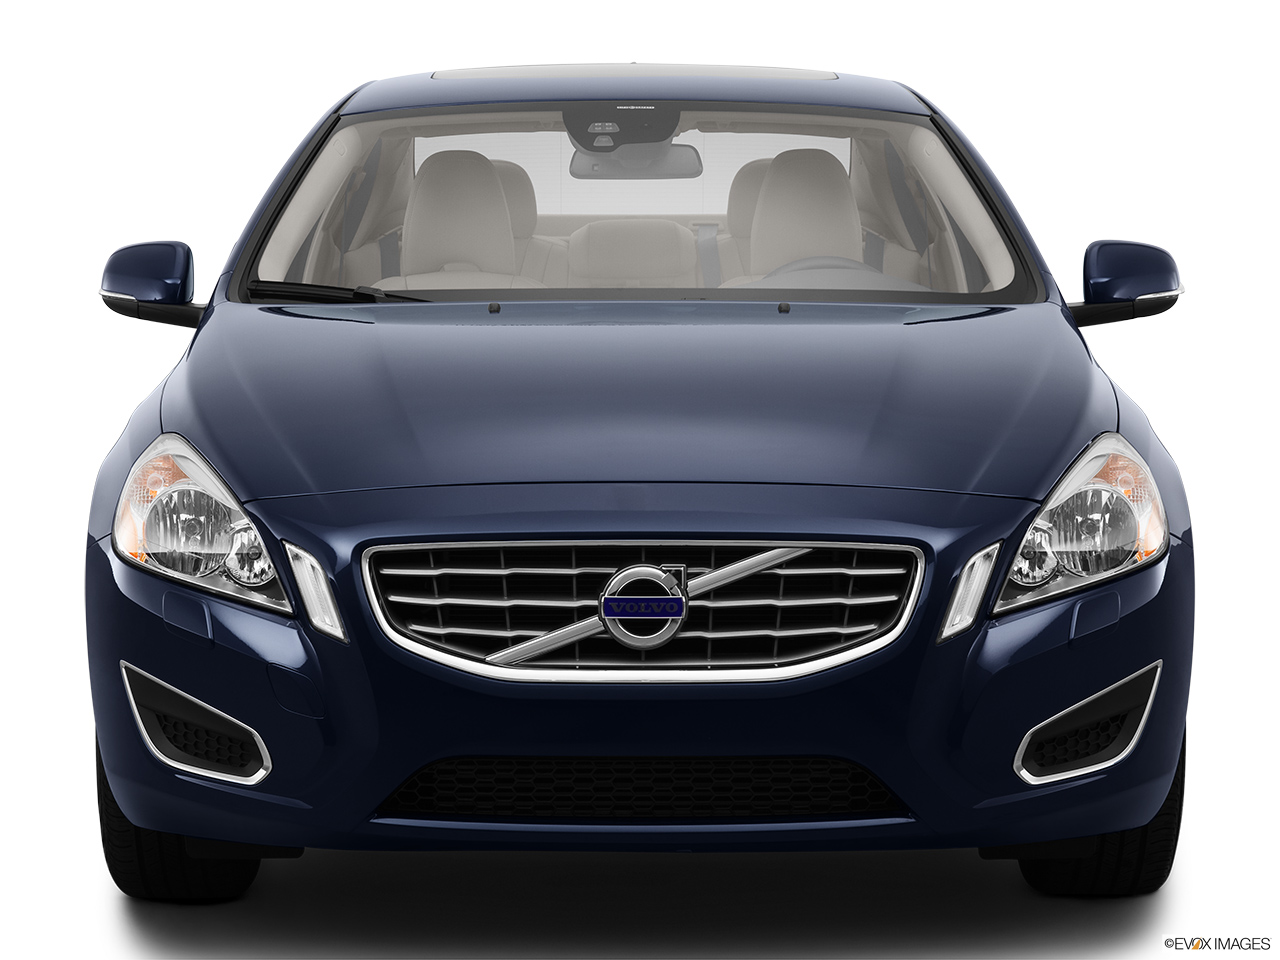 2013 Volvo S60 T5 FWD Premier Low/wide front. 